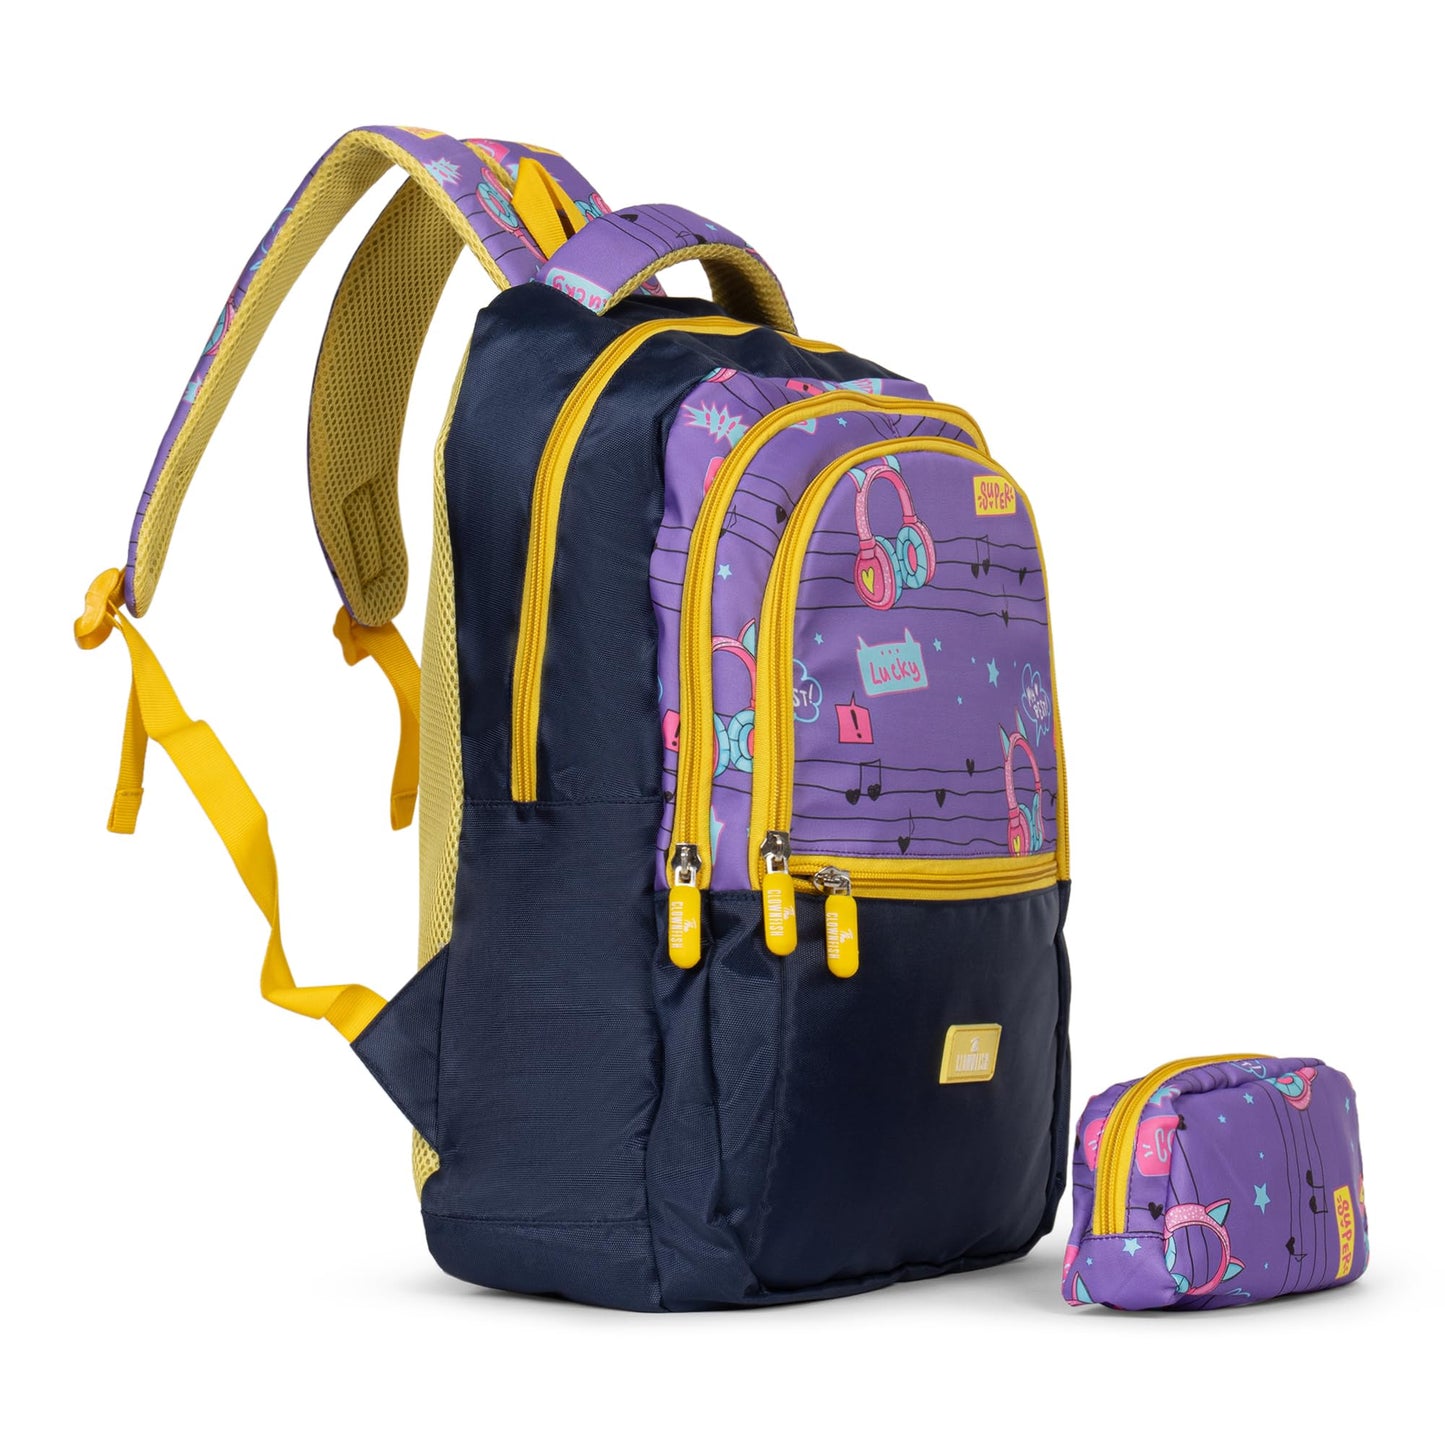 The Clownfish Edutrek Series Printed Polyester 33.5 L School Backpack with Pencil/Stationery Pouch School Bag Zip Pocket Daypack Picnic Bag For School Going Boys & Girls Age-10+ years (Violet - Music)